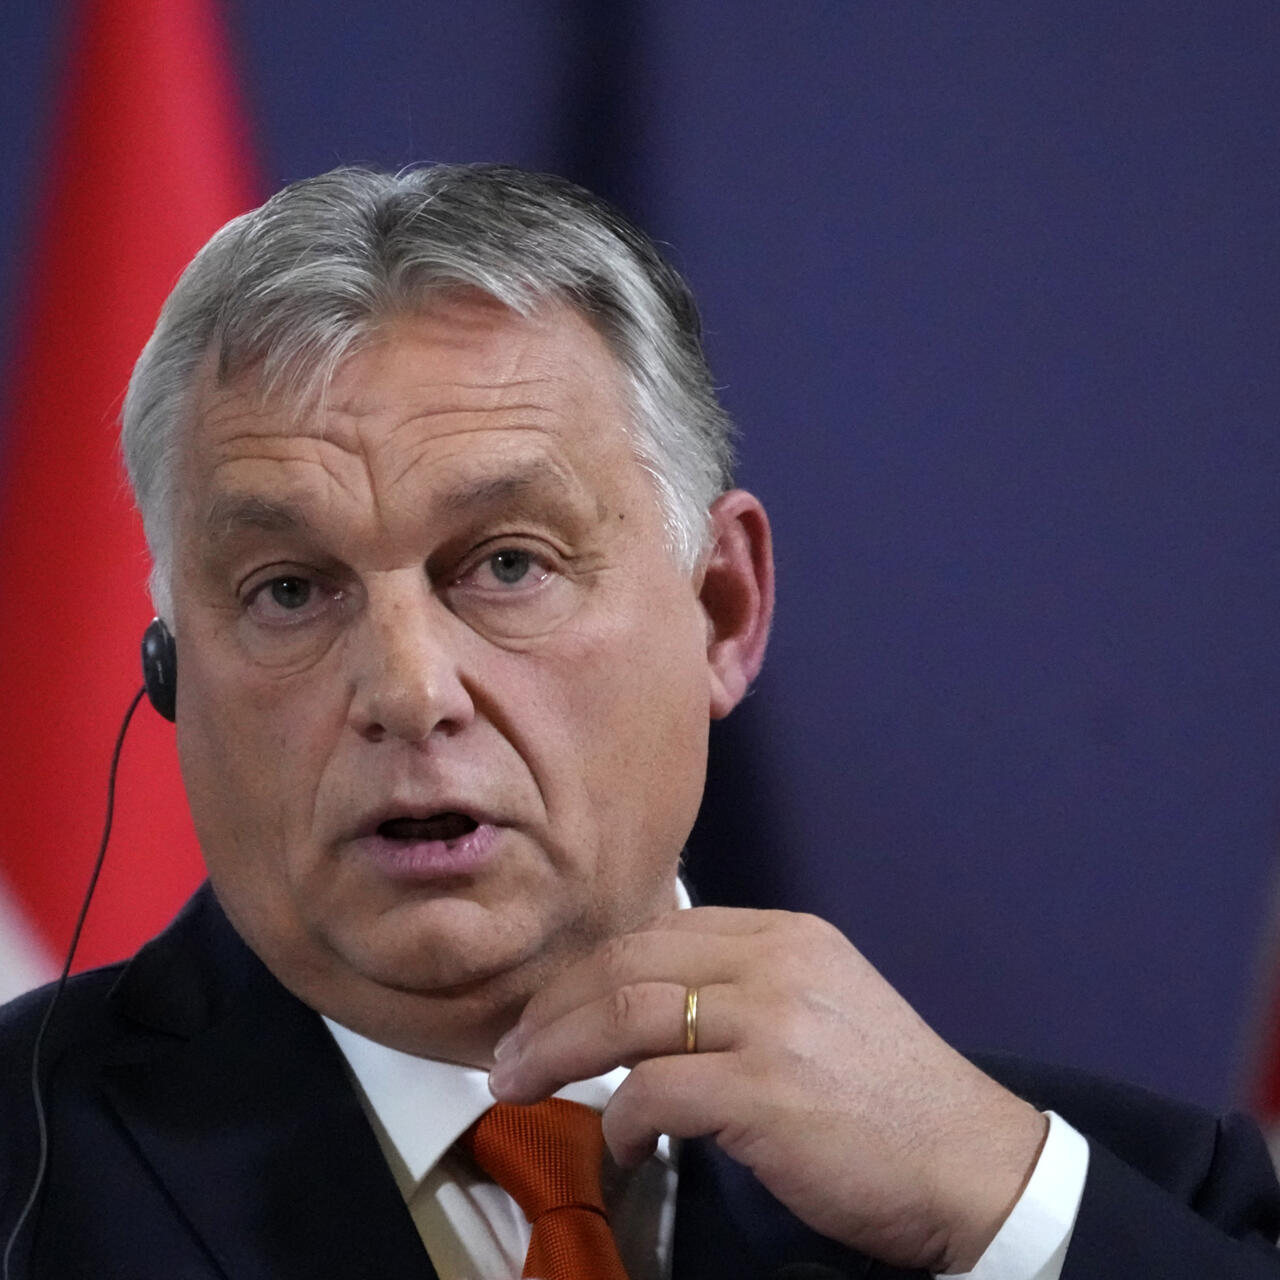 Hungary explains what might force West to want peace in Ukraine